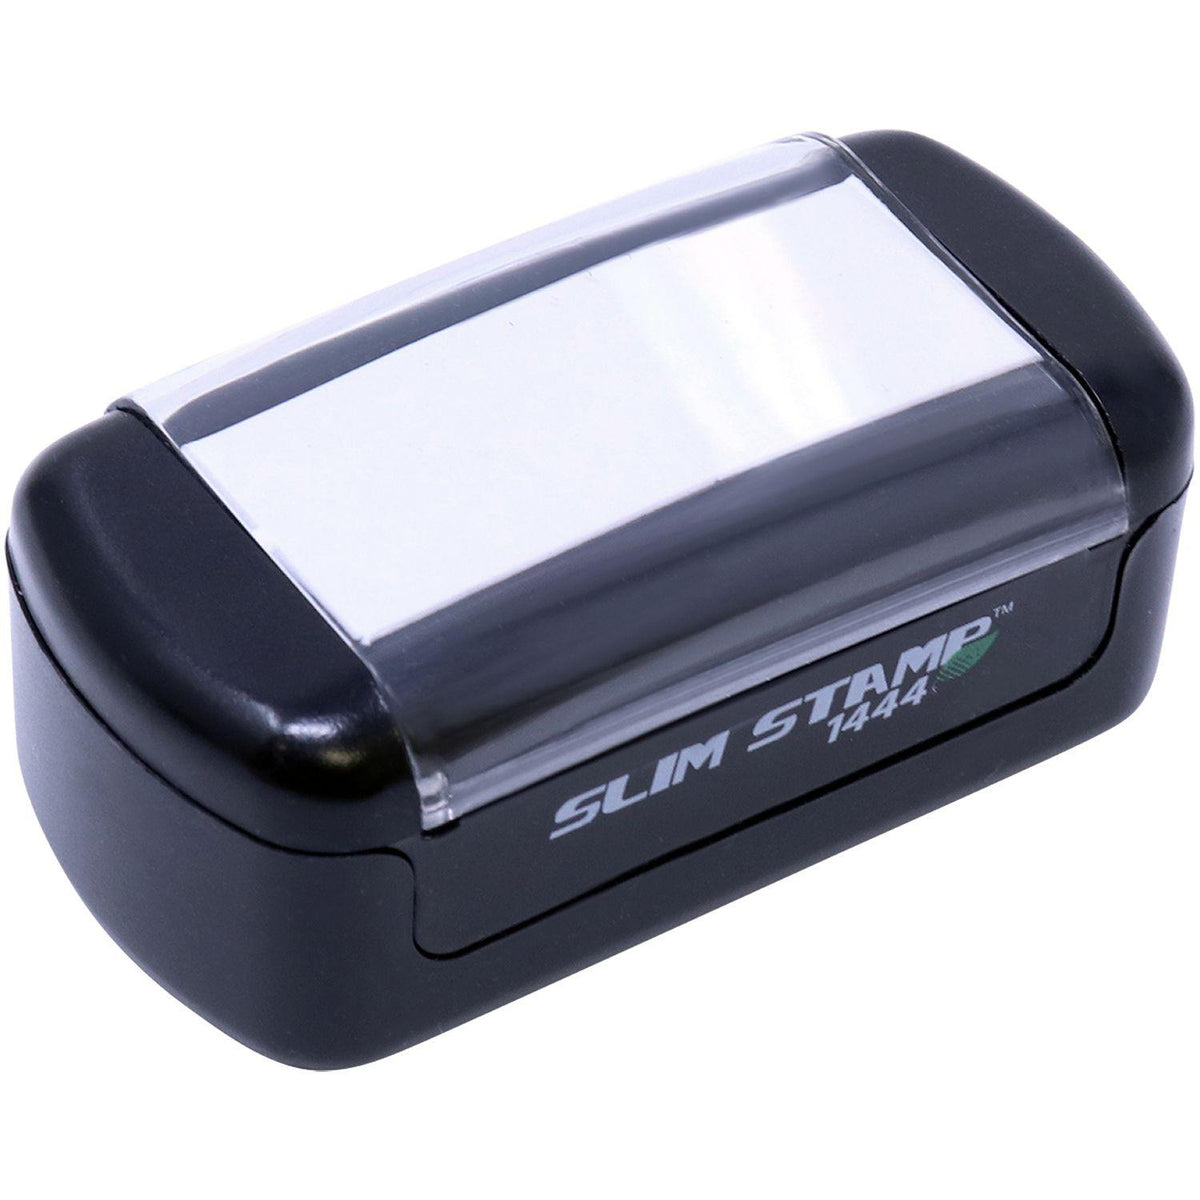 Slim Pre-Inked Bold Shred Stamp - Engineer Seal Stamps - Brand_Slim, Impression Size_Small, Stamp Type_Pre-Inked Stamp, Type of Use_Business, Type of Use_General, Type of Use_Office